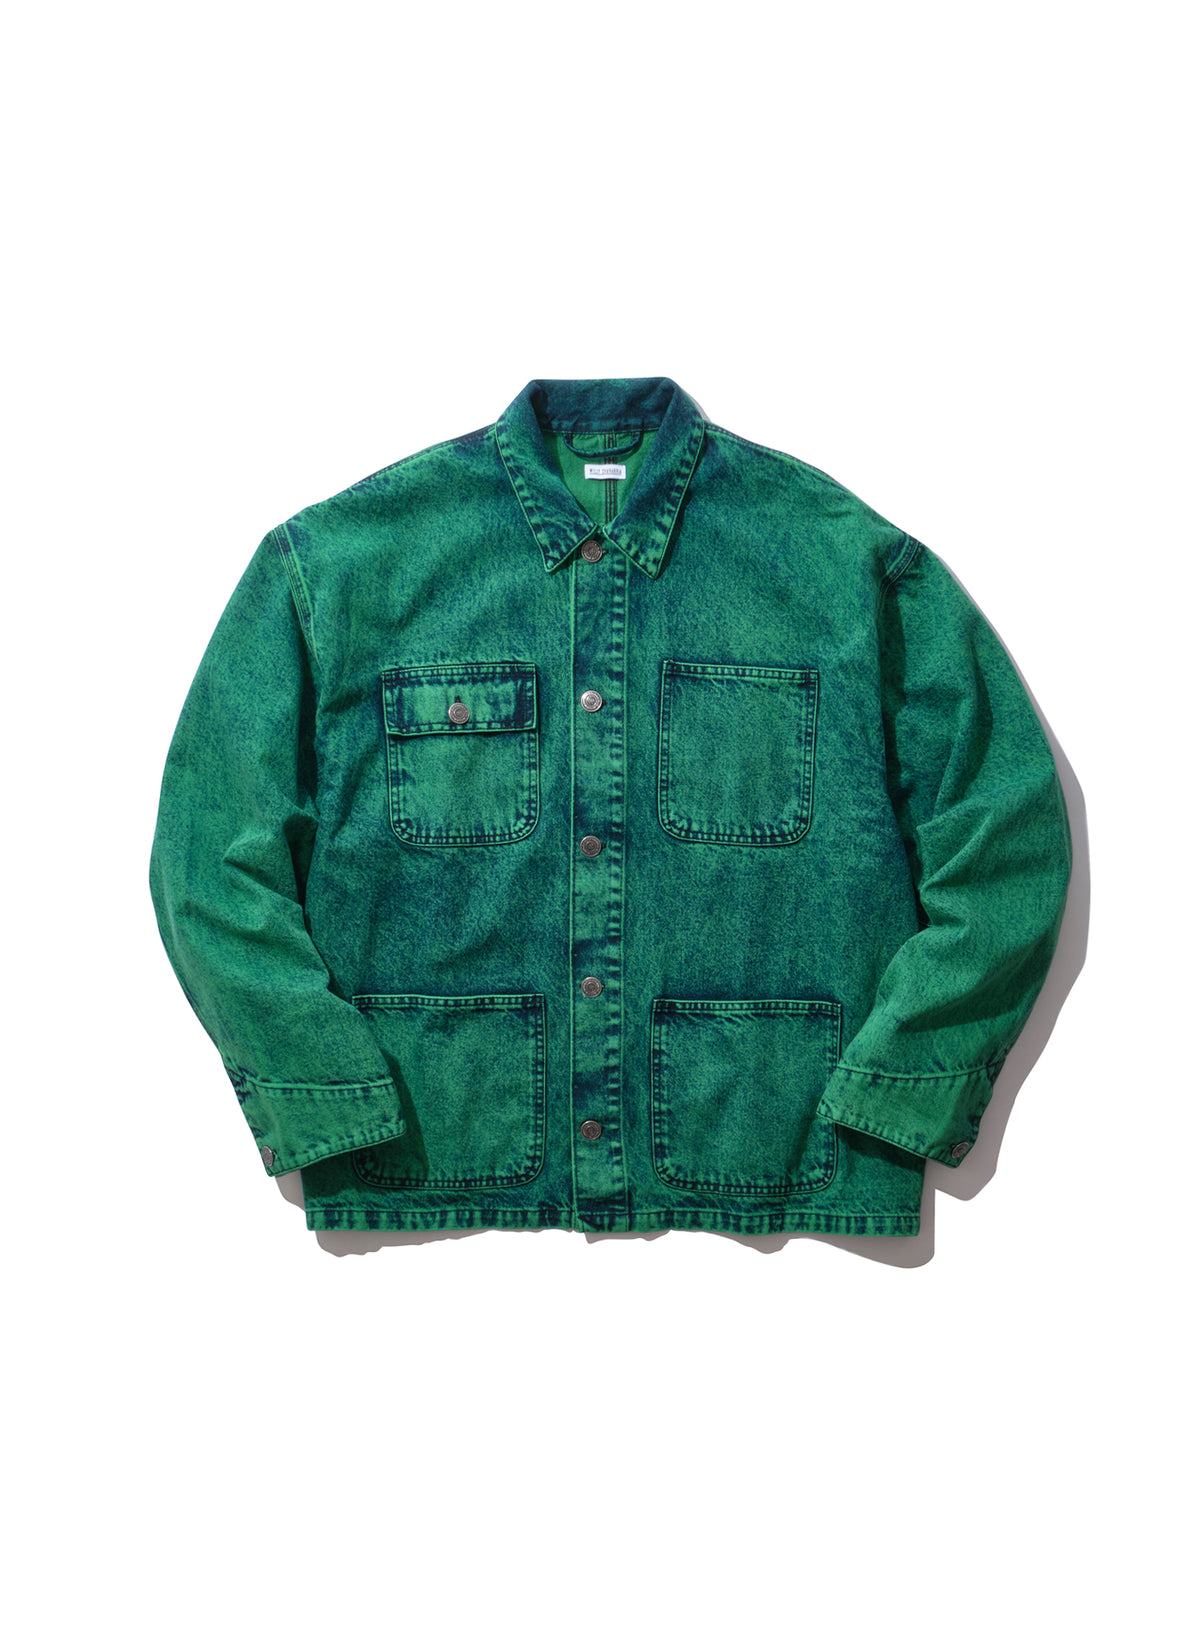 <span style="color: #f50b0b;">Last One</span> WILLY CHAVARRIA / BIG DADDY JACKET OVERD GREEN